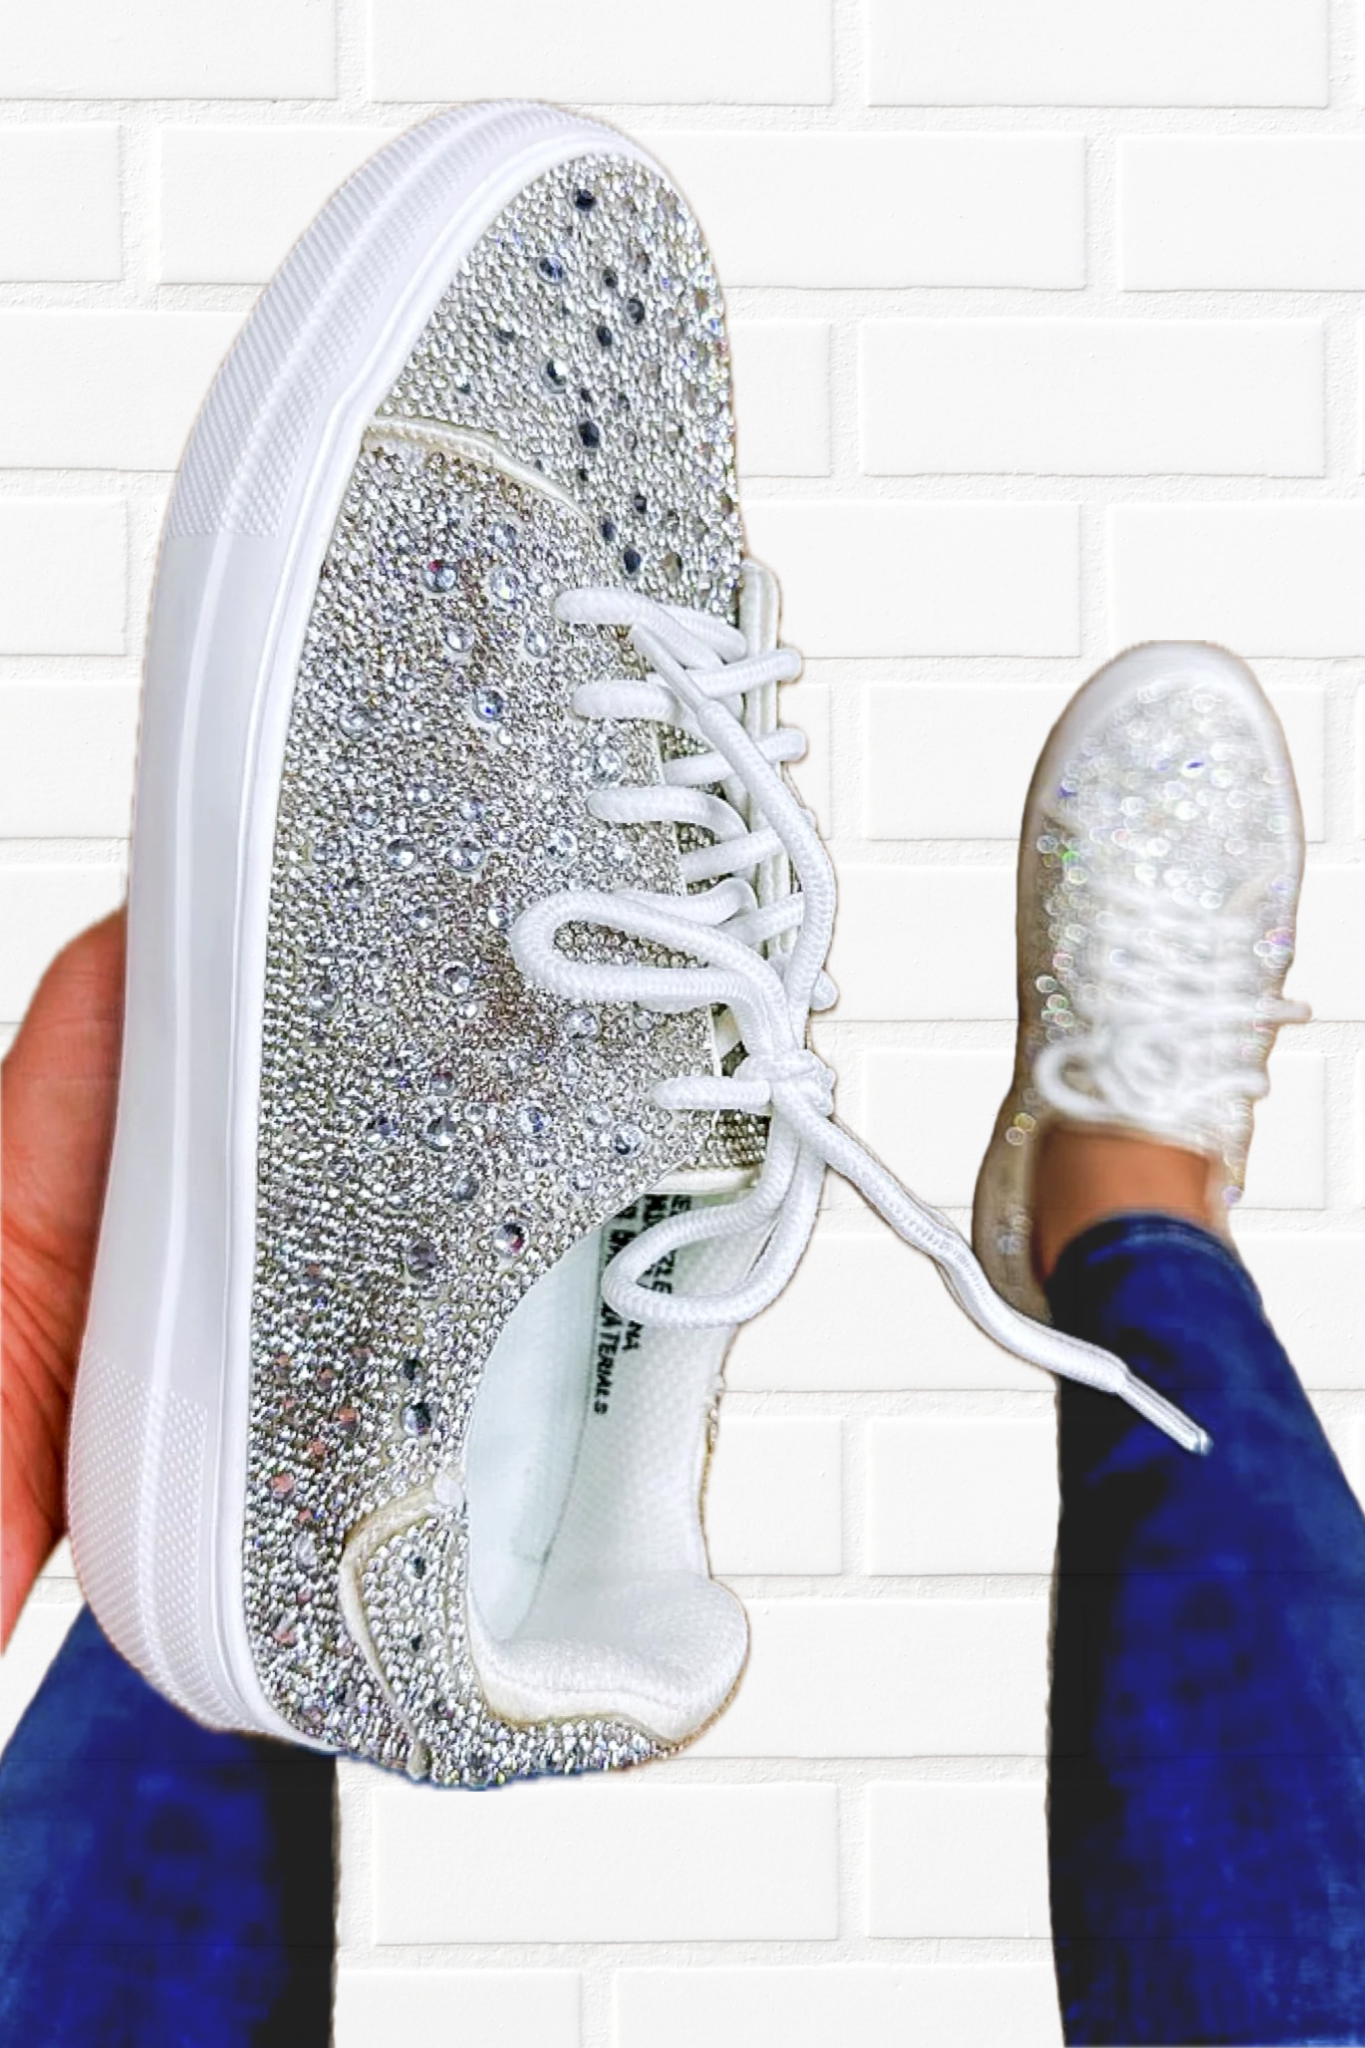 Bedazzle Rhinestone Sneaker in Crystal Clear by Corky's – Jules